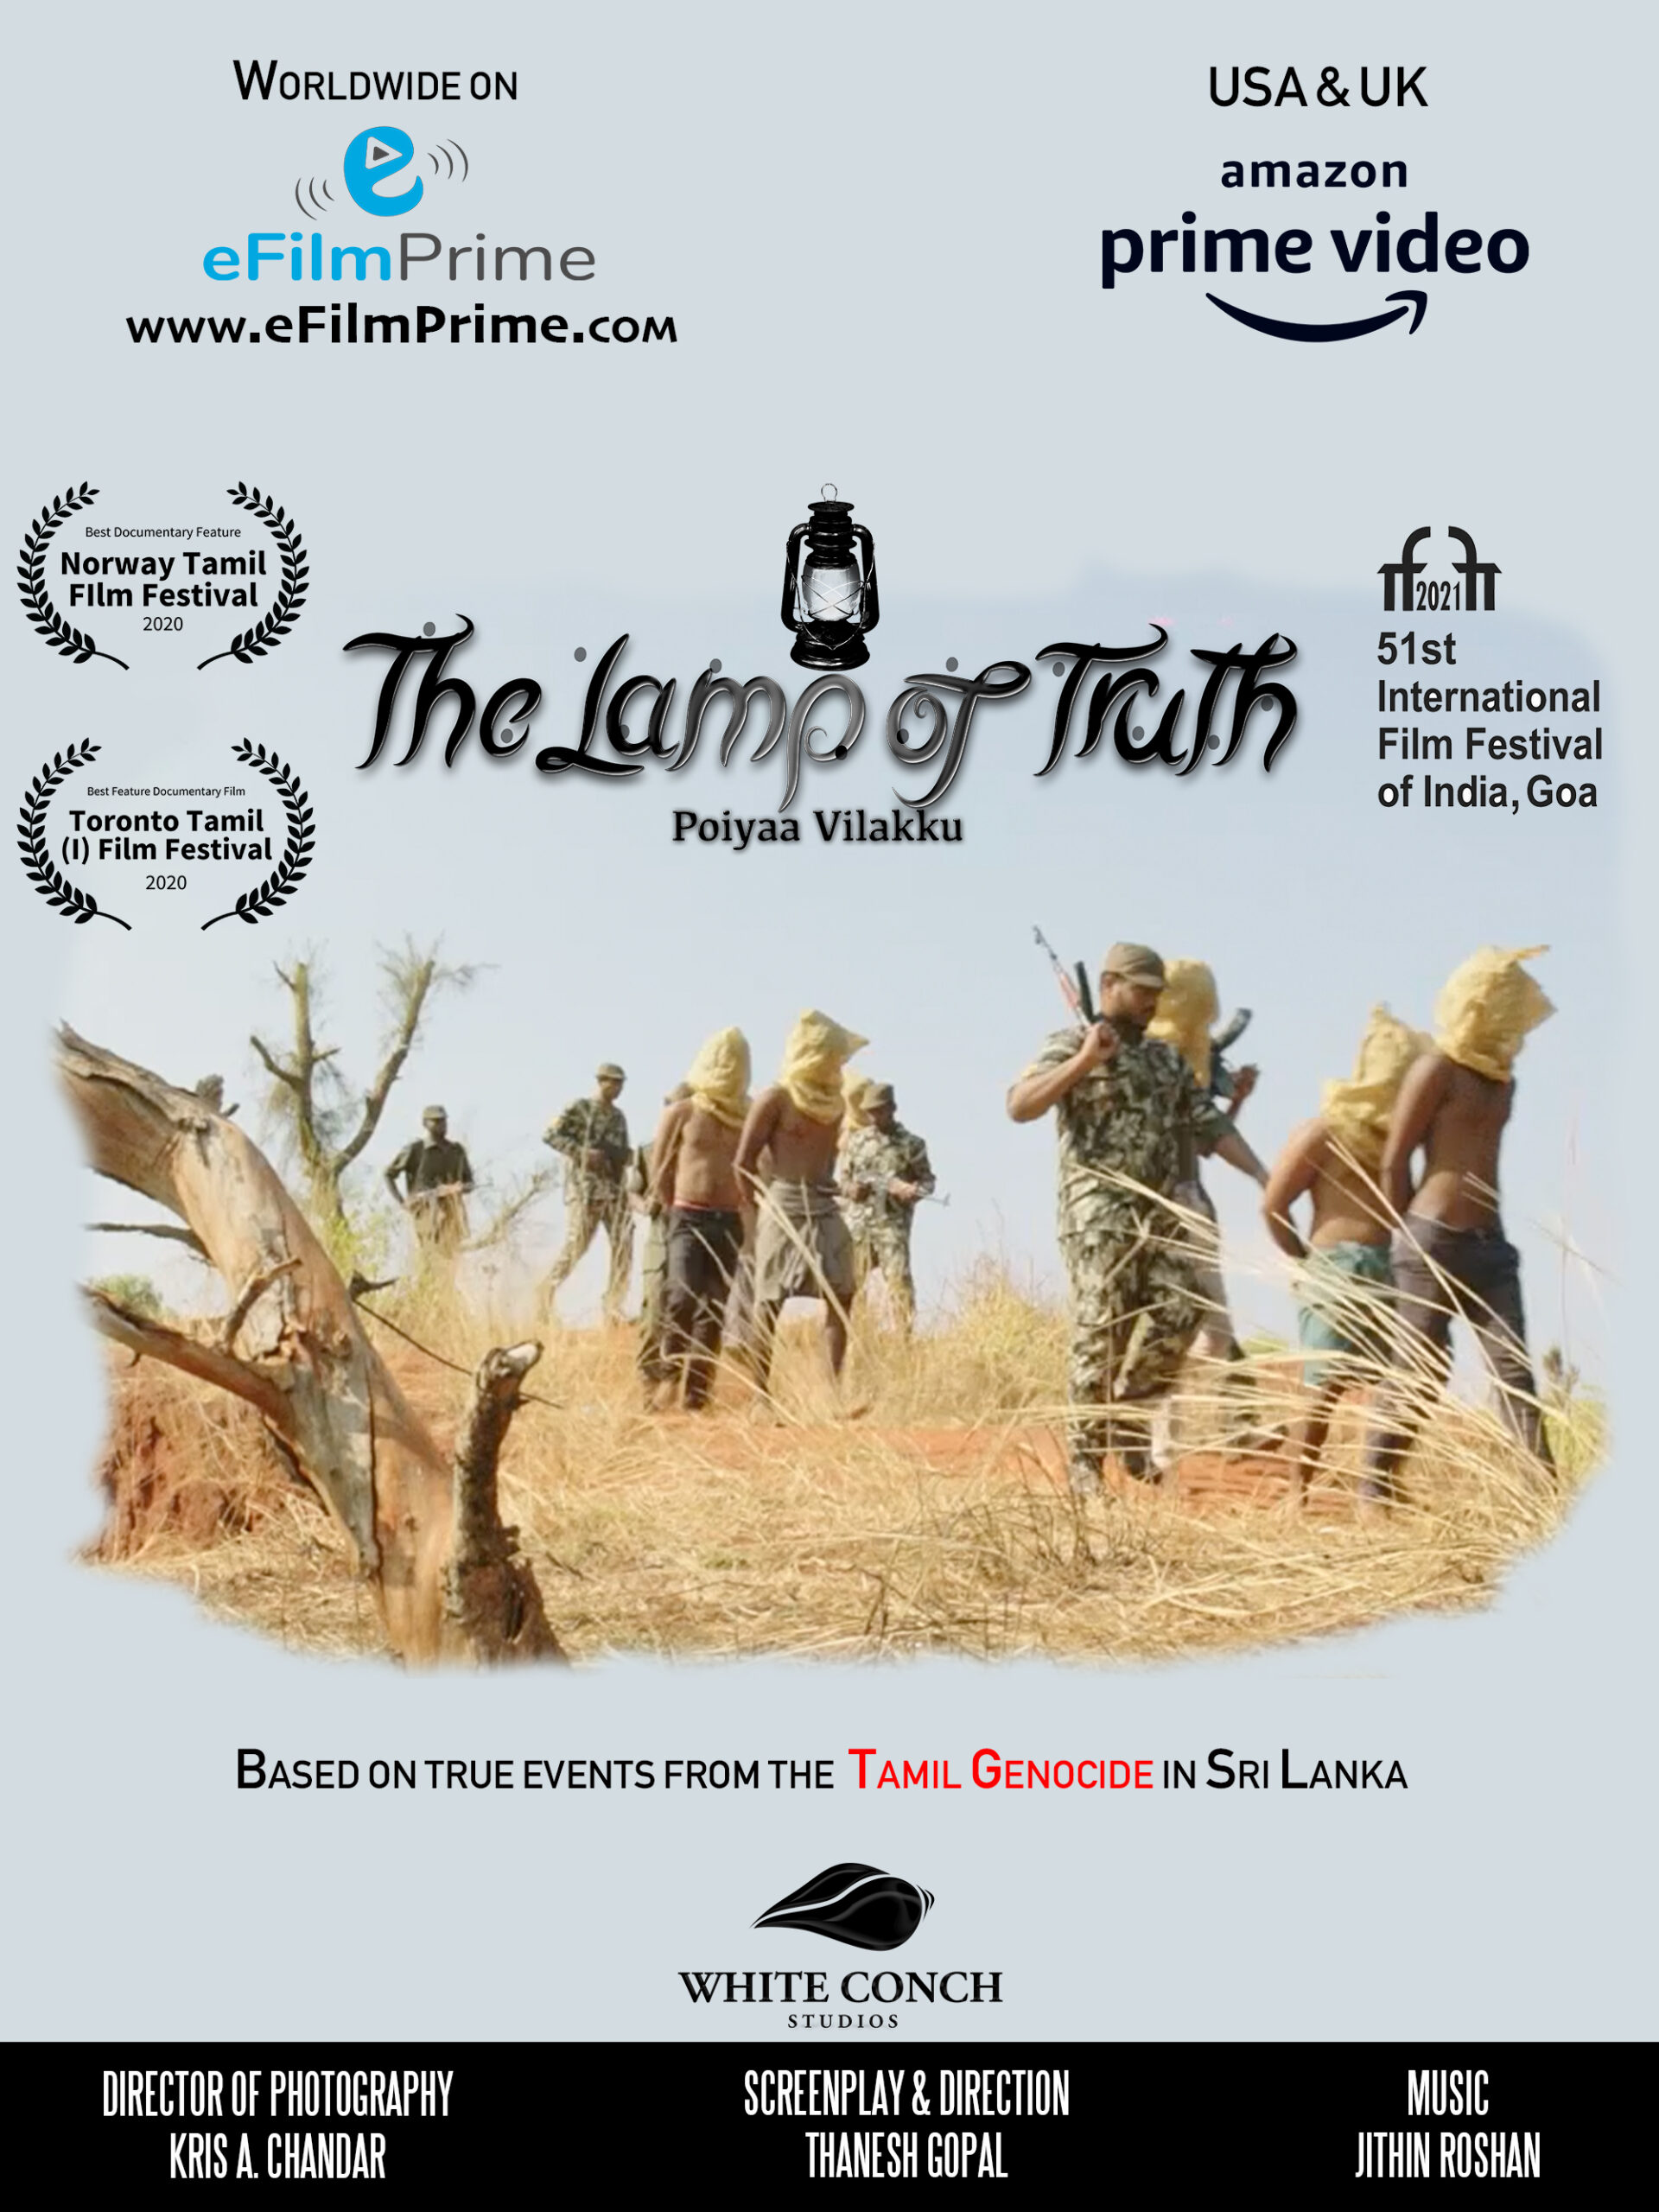 Lamp of truth movie now on www.eFilmPrime.com